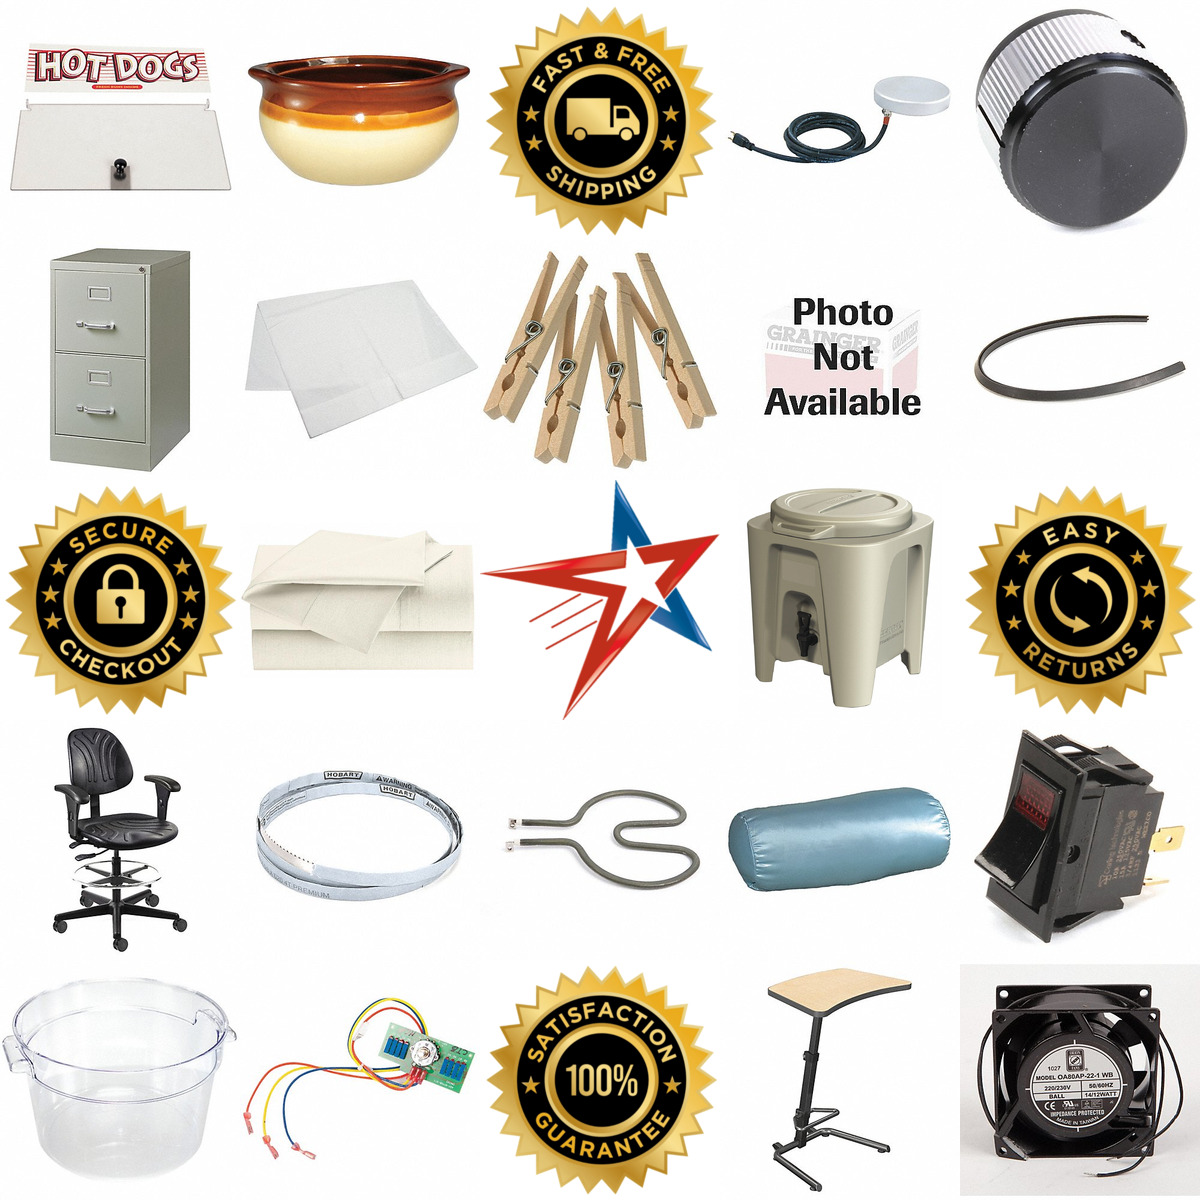 A selection of Furniture Hospitality and Food Service products on GoVets